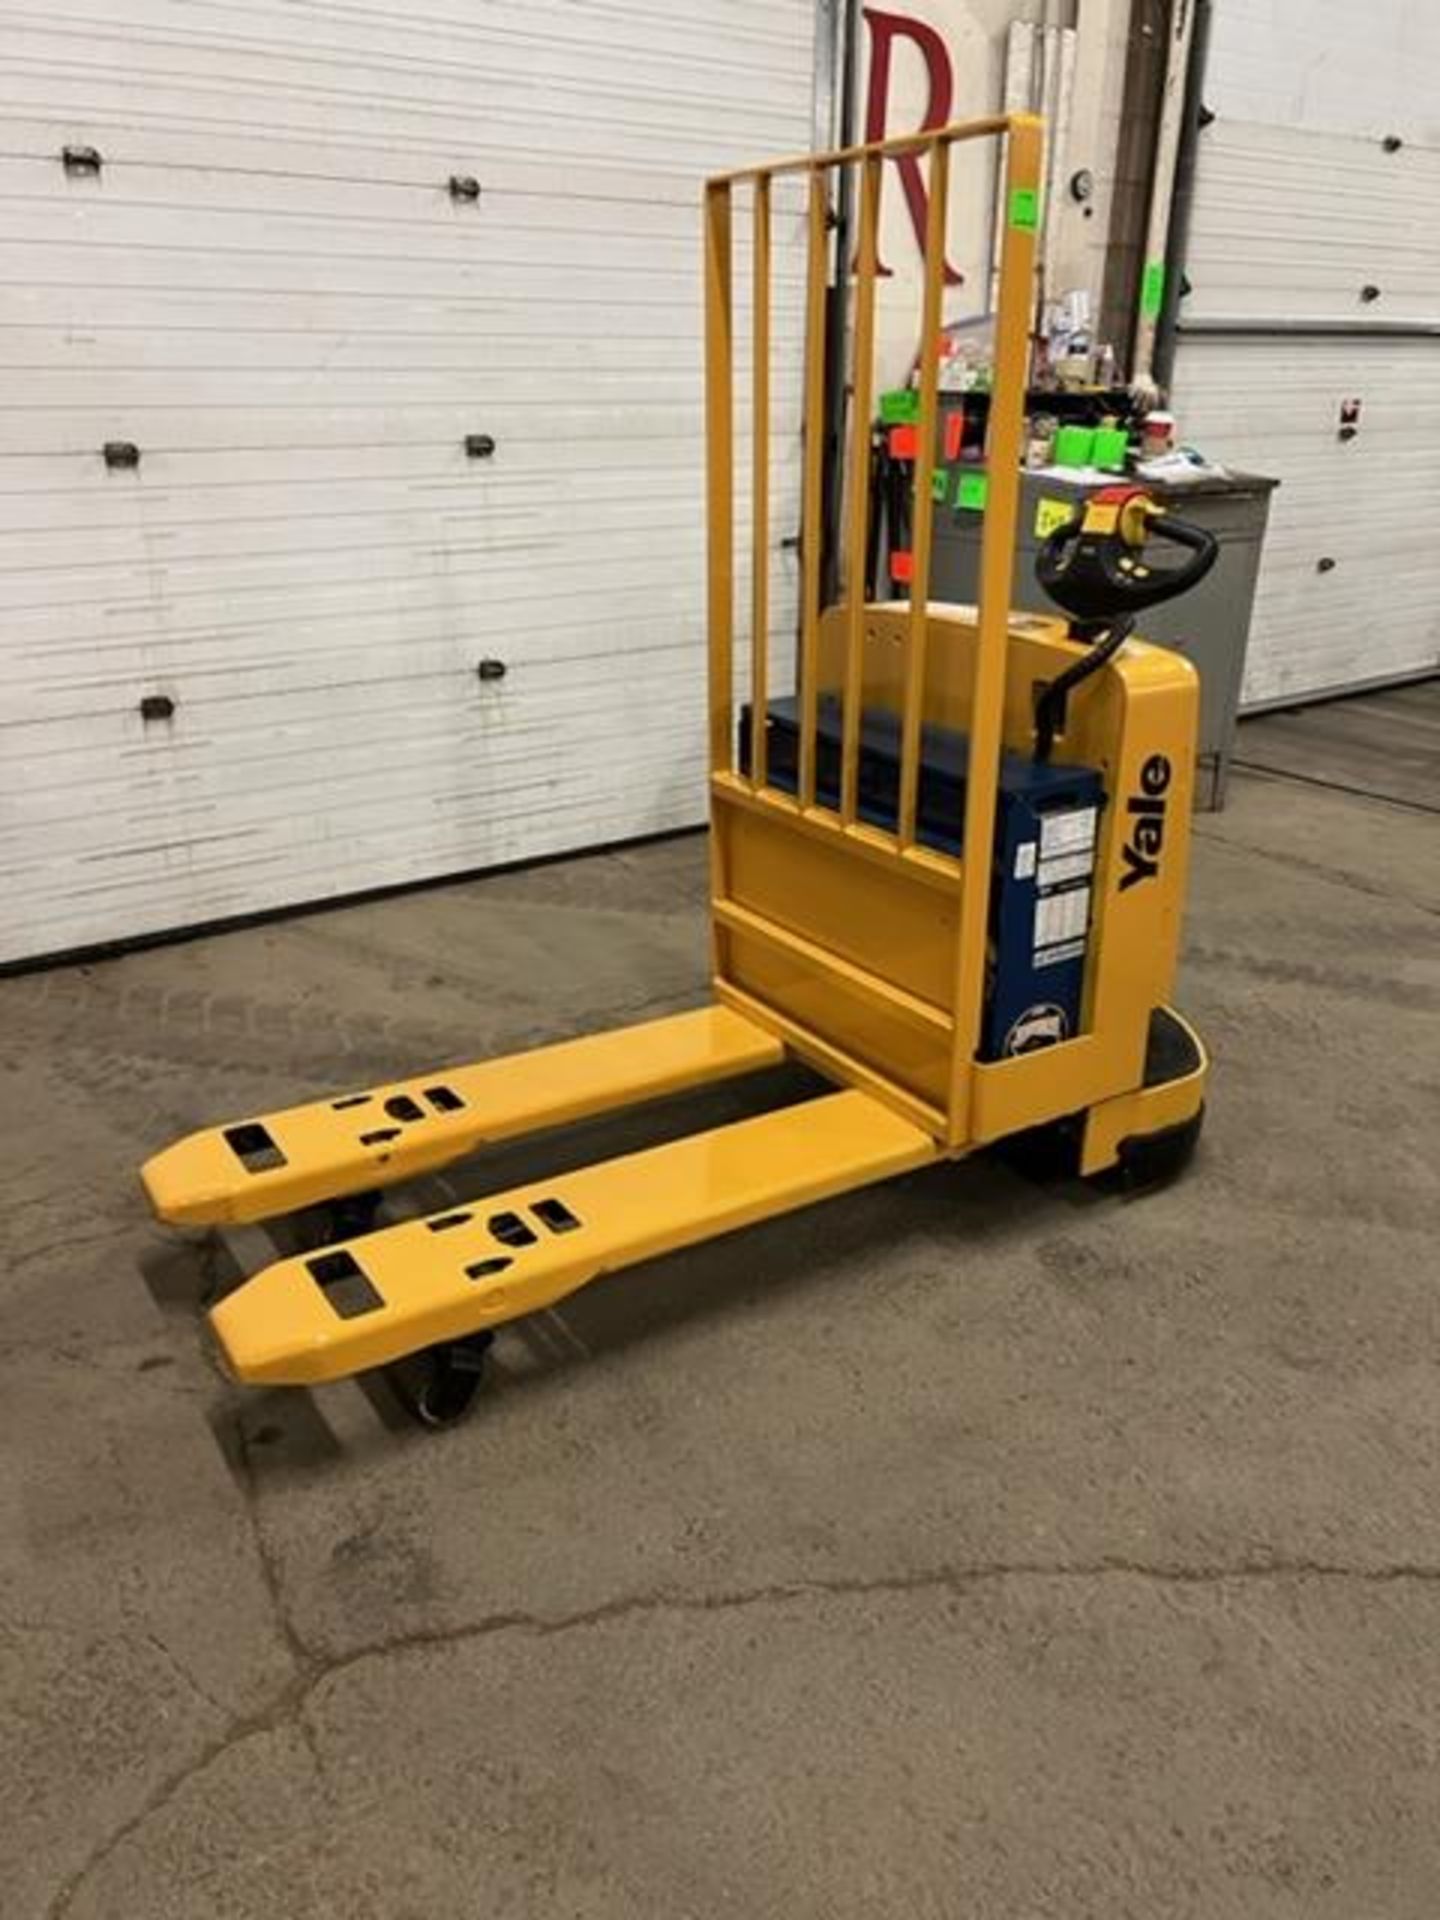 2005 Yale Walk Behind Walkie 6500lbs capacity Powered Pallet Cart Lift NICE UNIT with LOW HOURS - Image 2 of 3